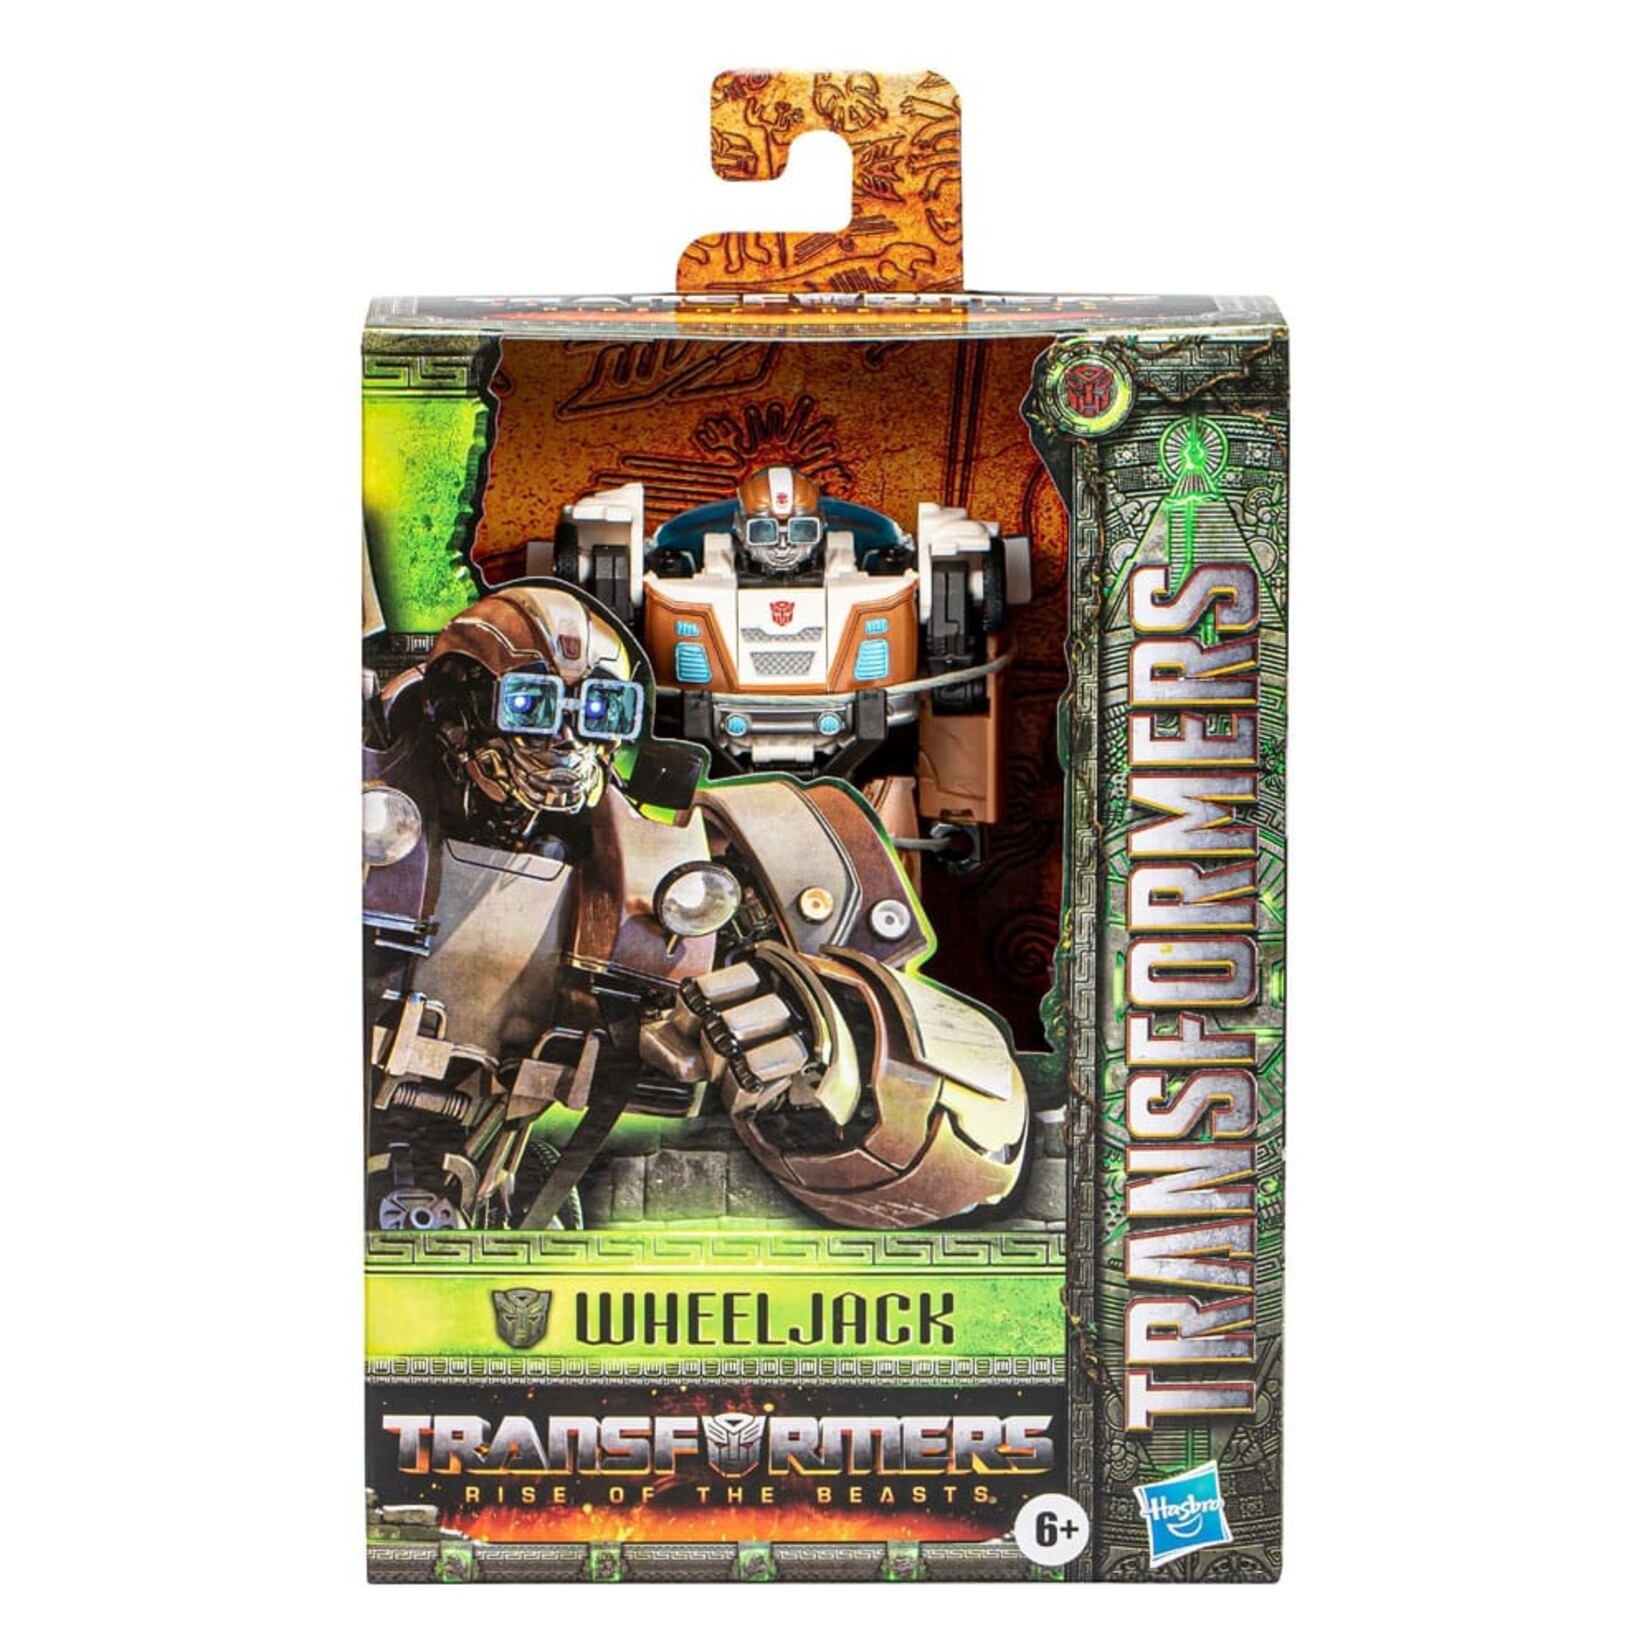 Hasbro Hasbro Transformers Rise of the Beasts Deluxe Class Action Figure Wheeljack 13 cm